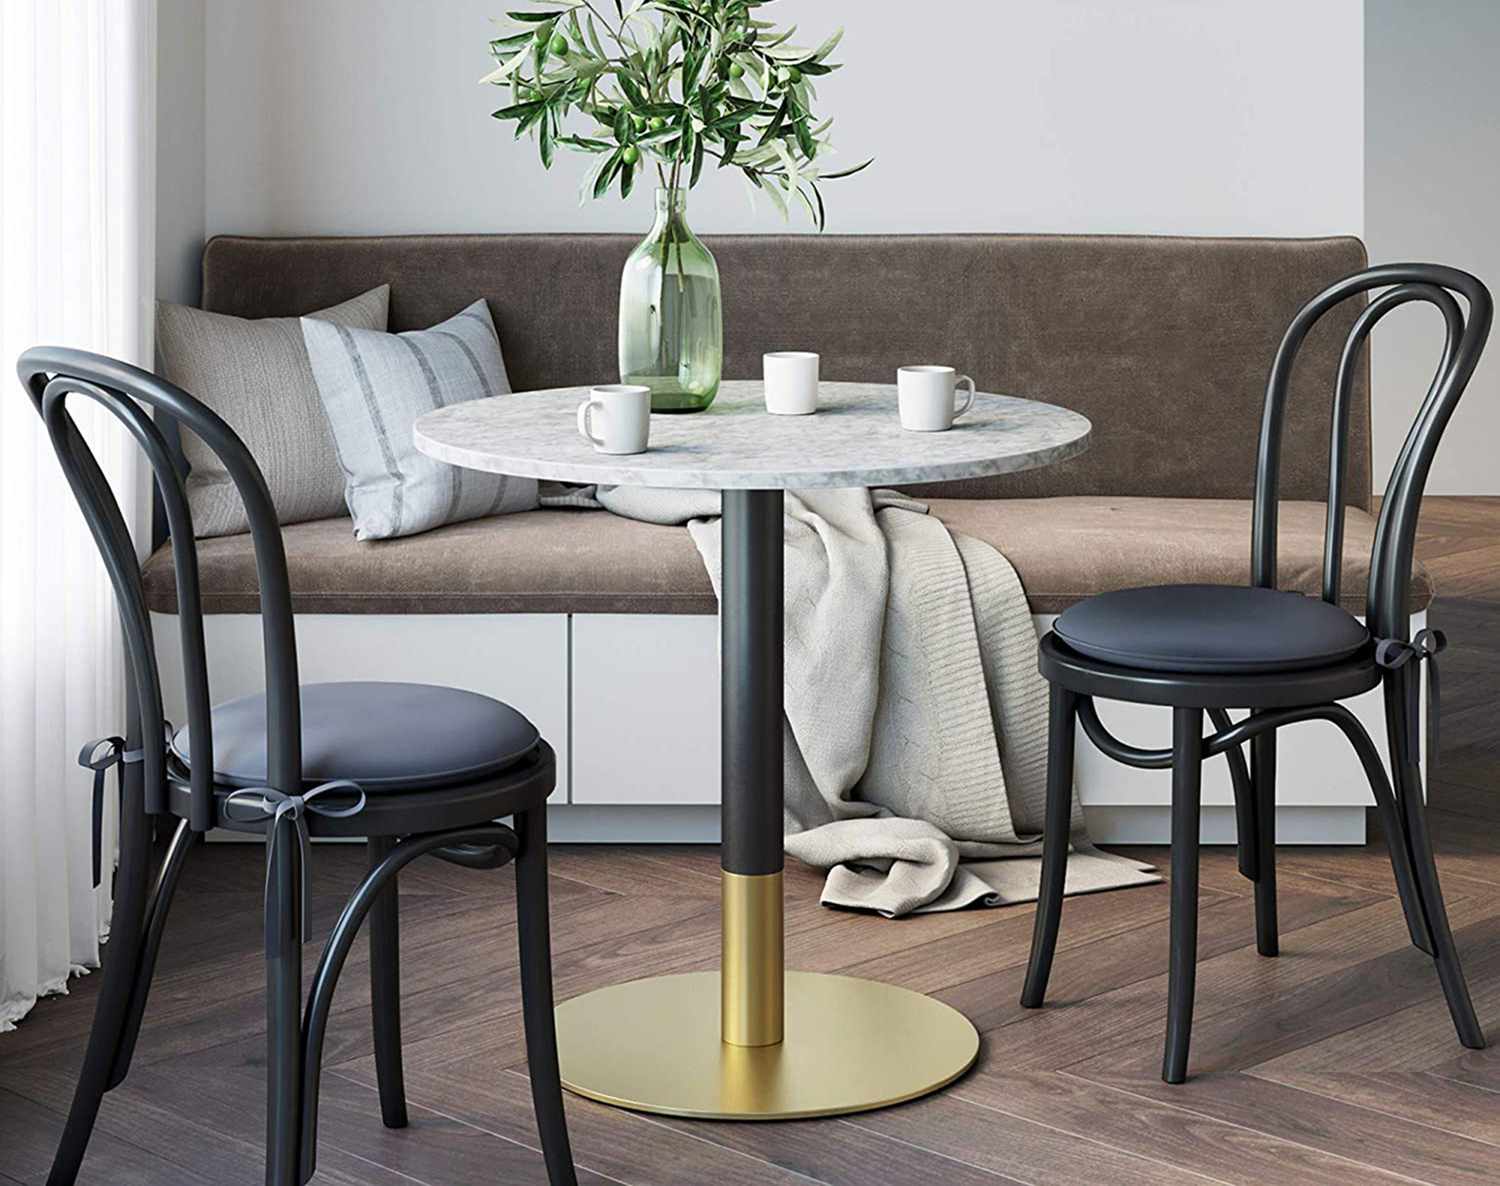 8 Best Dining Tables For Small Spaces, Small Dining Room Sets For Spaces